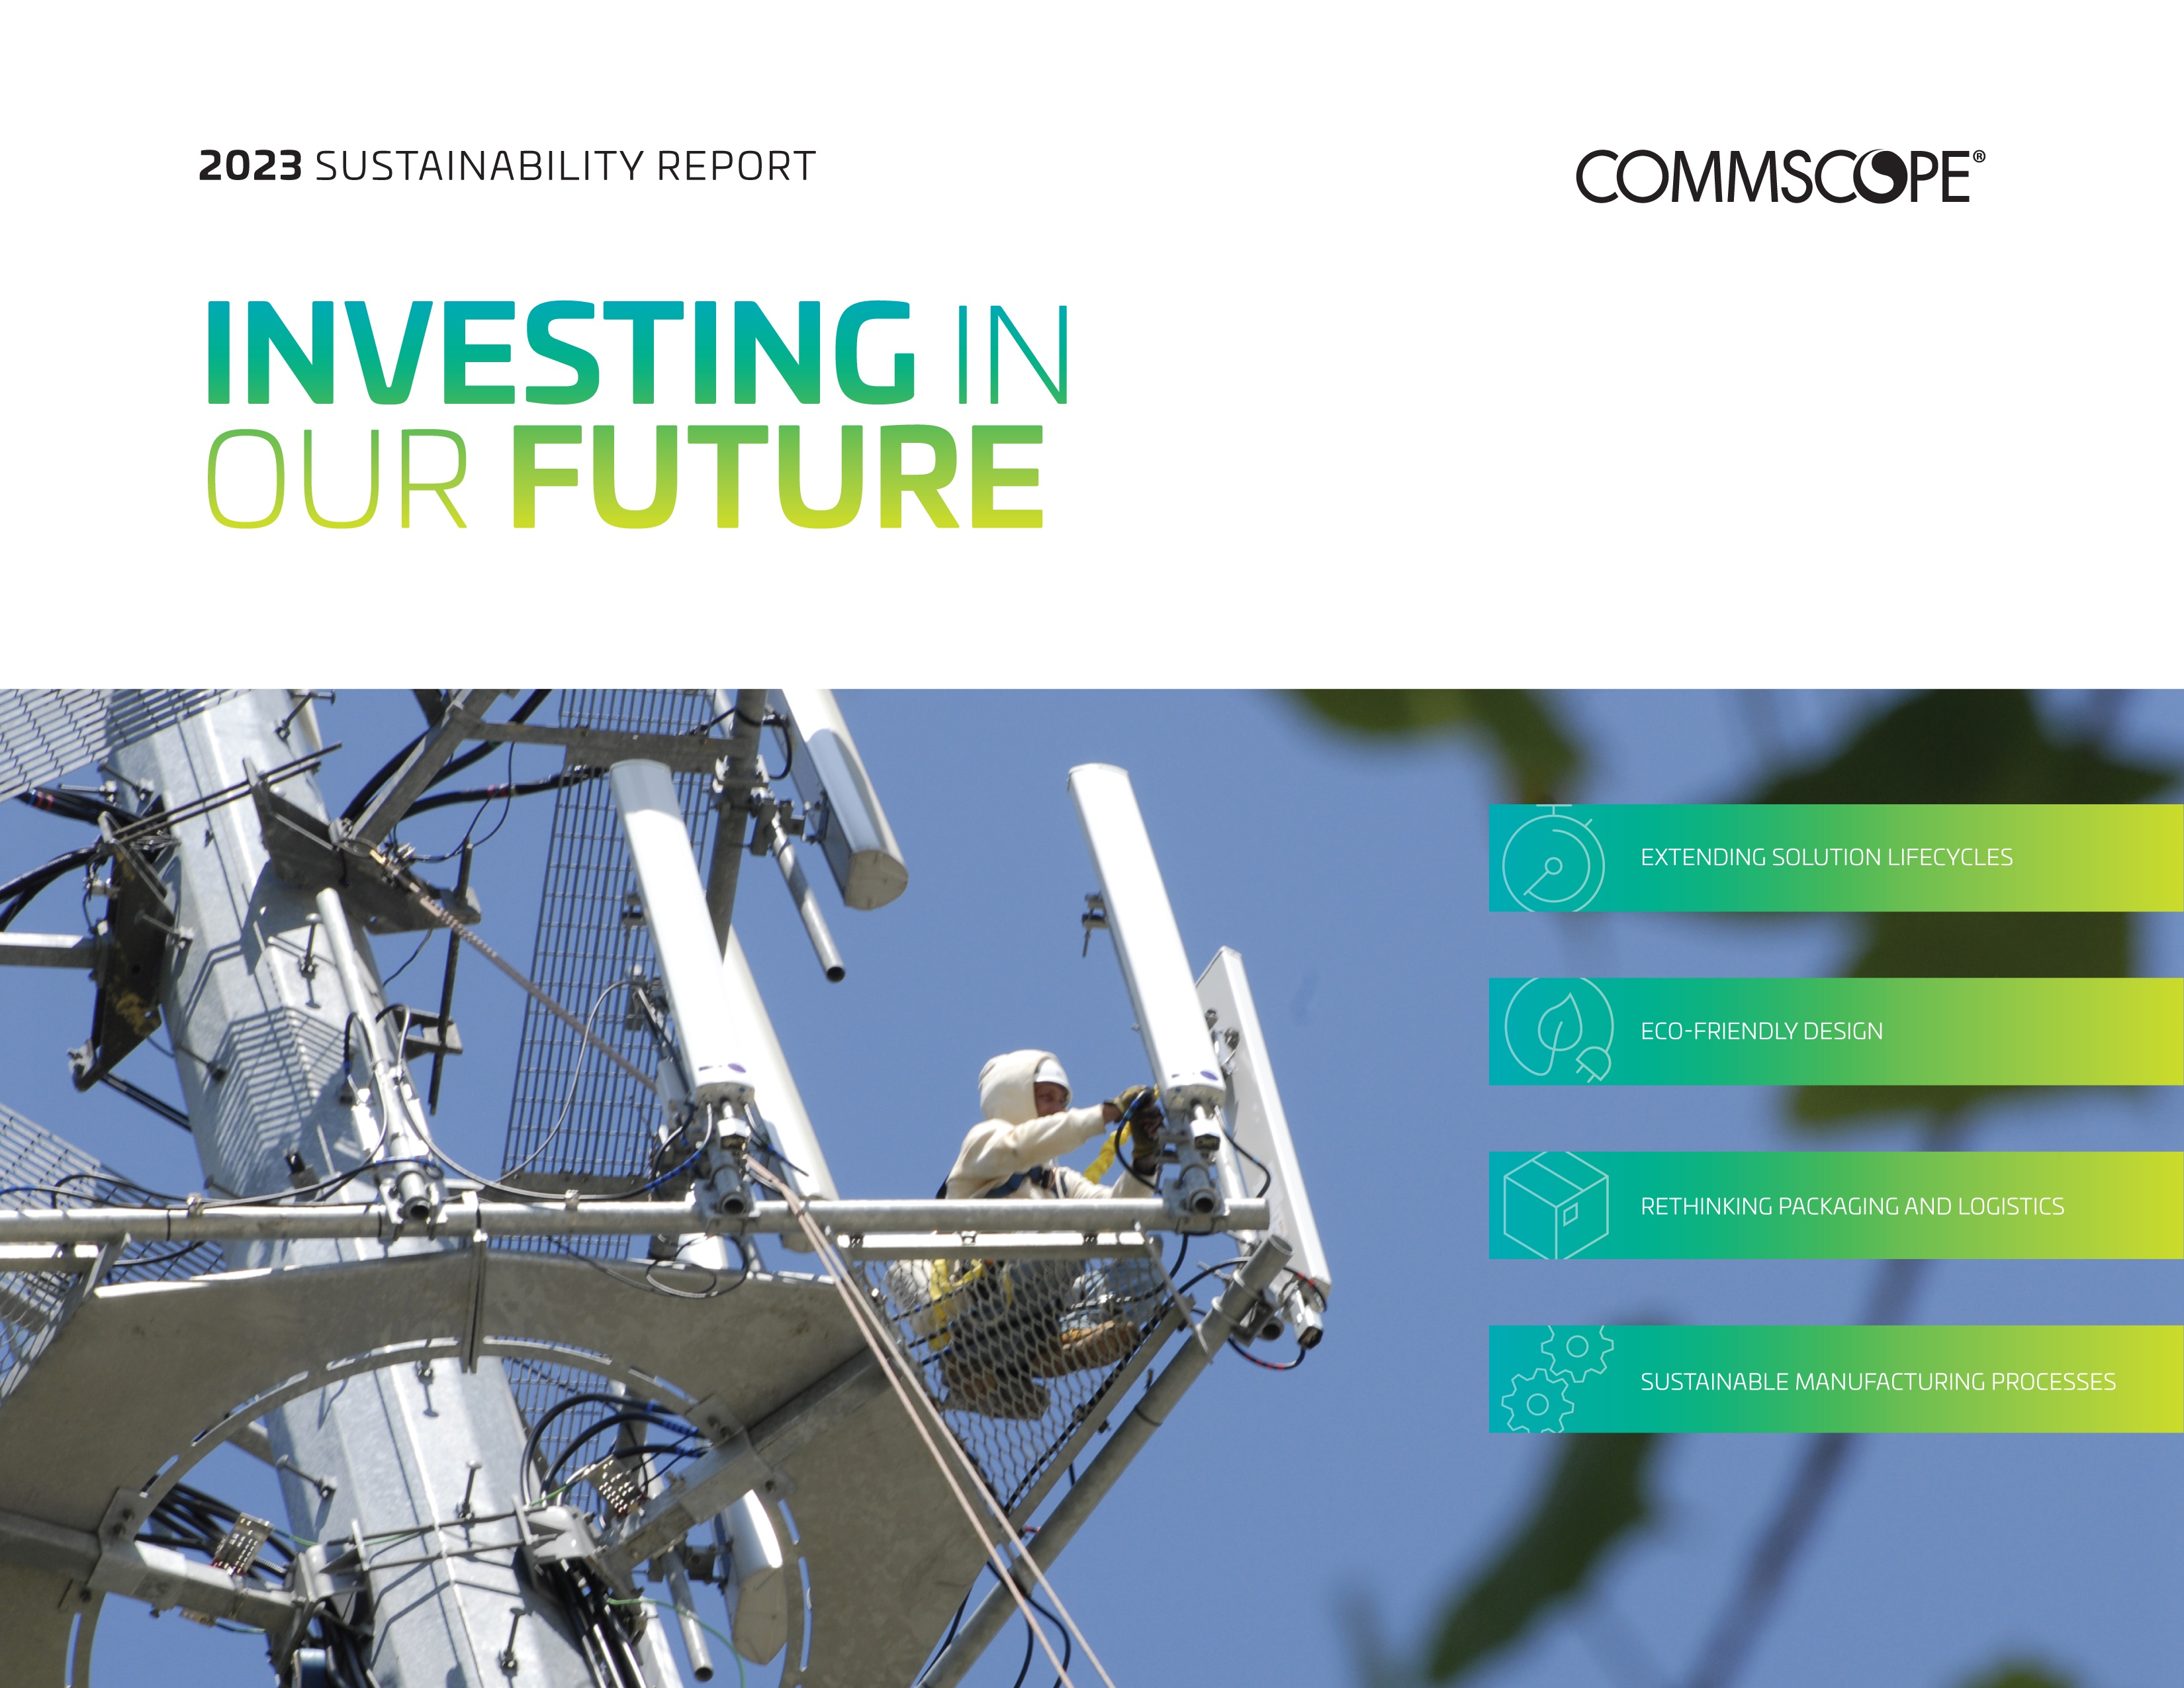 CommScope’s 2023 Sustainability Report: Investing in Our Future 